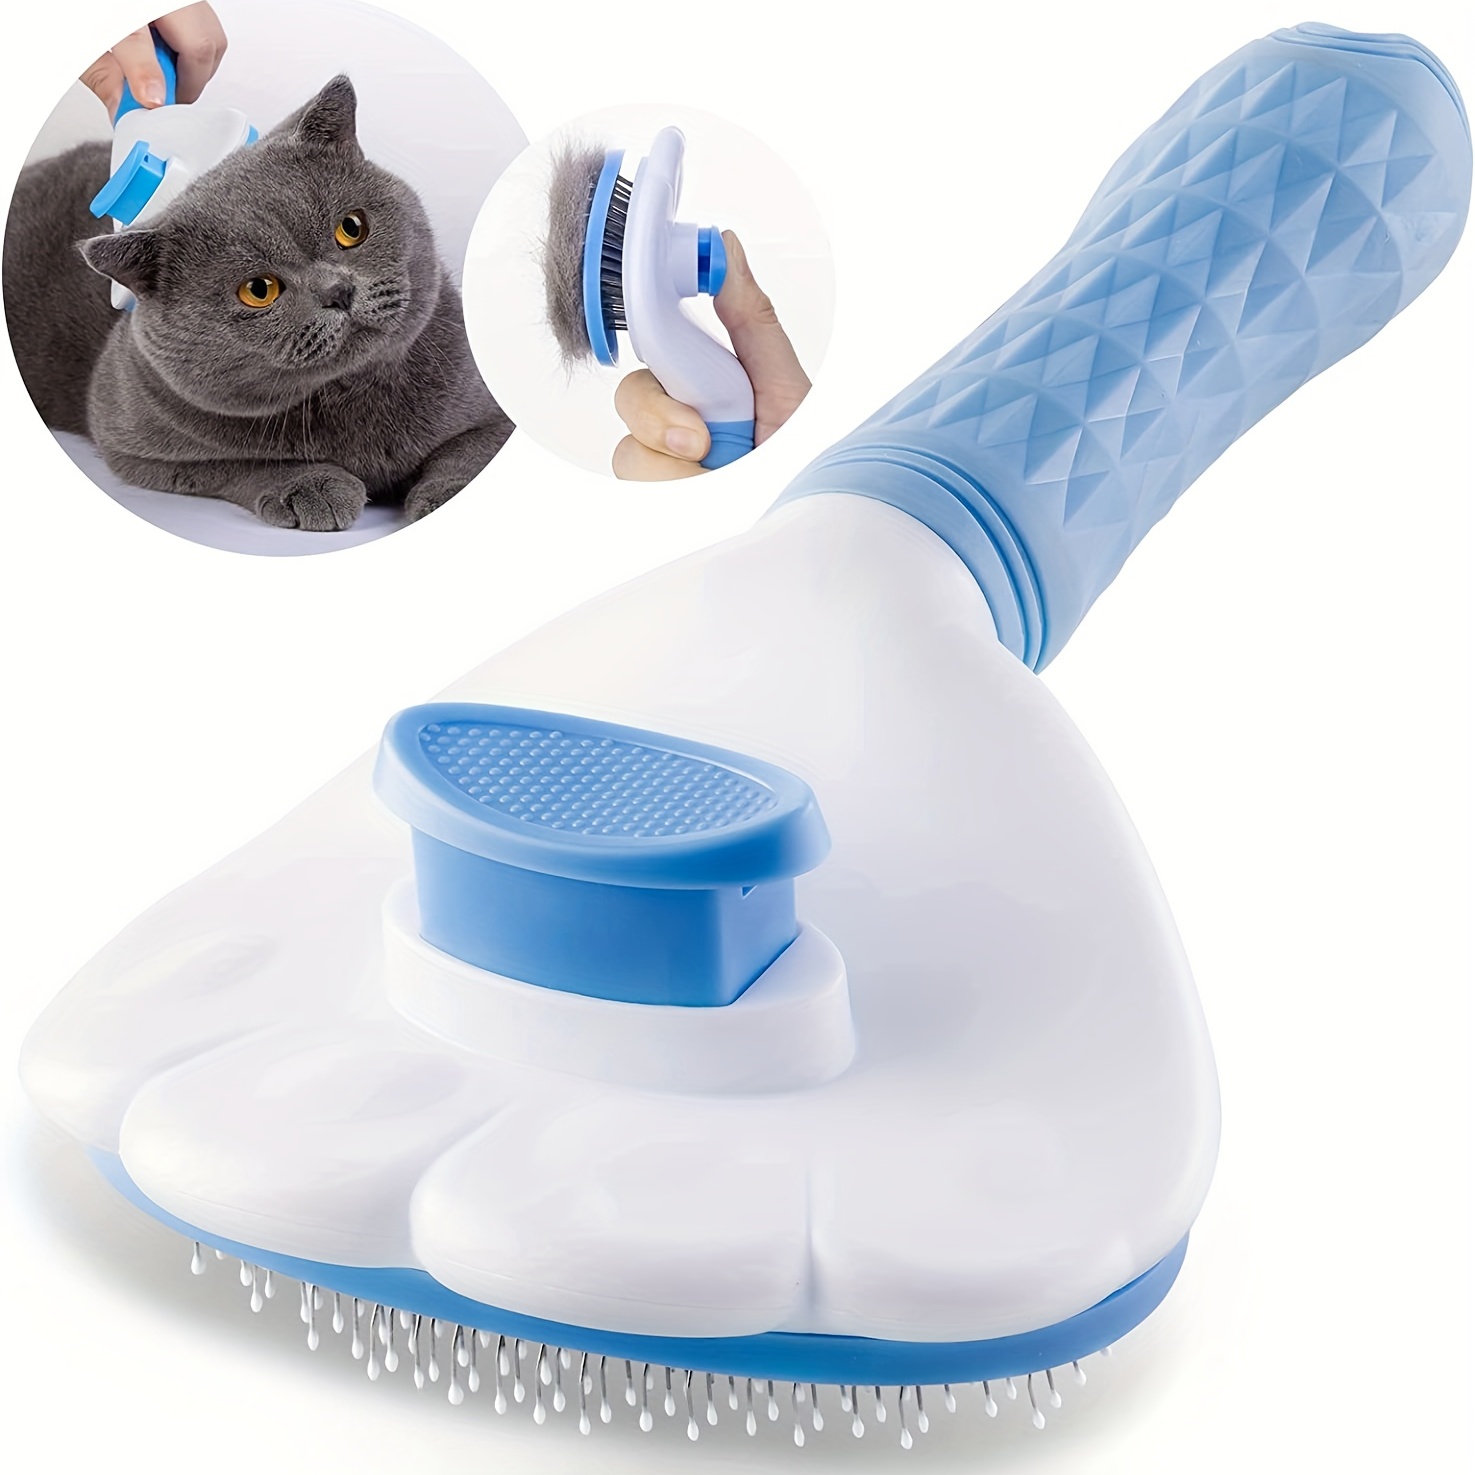 Steamy Cat Brush, Upgraded 4 in 1 Multifunctional Cat Steamer Brush, Self  Cleaning Steam Cat Brush for Massage, Steam Pet Brush for Removing Tangled